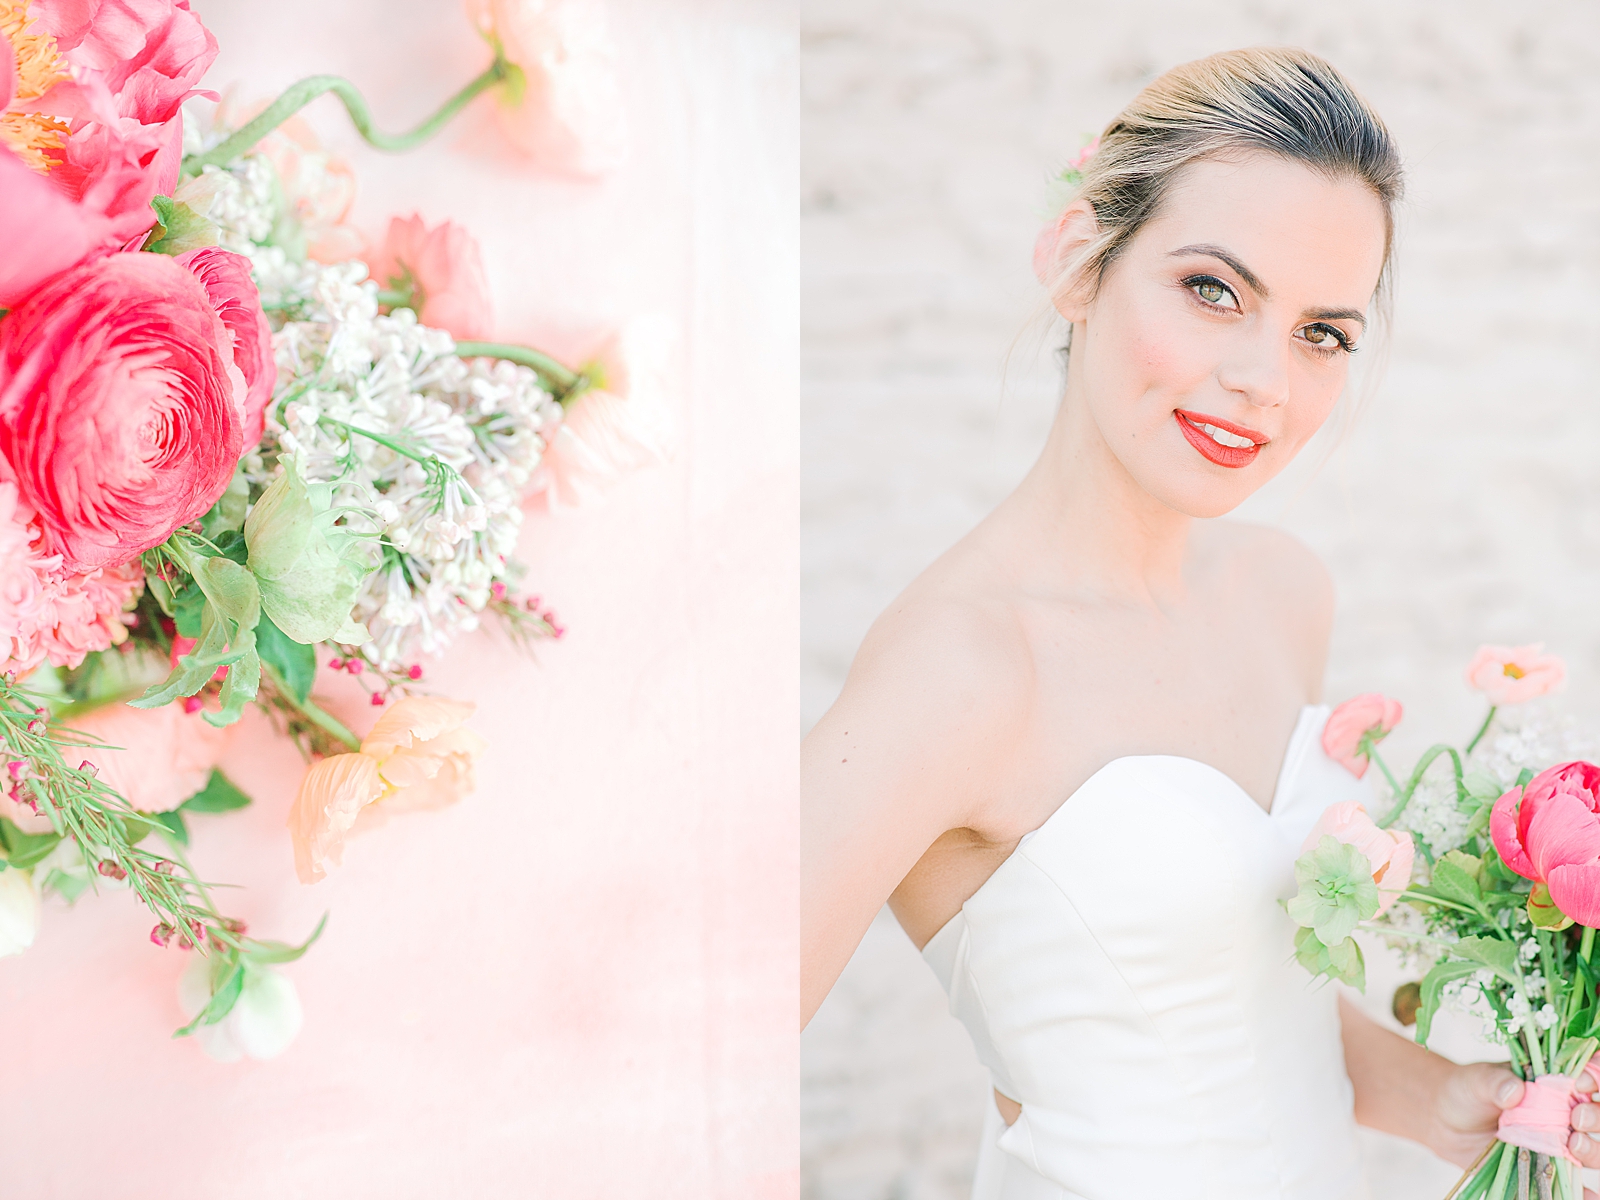 Spring Brickyard Wedding bridal Bouquet Detail and Bride Smiling at camera holding bouquet Photos